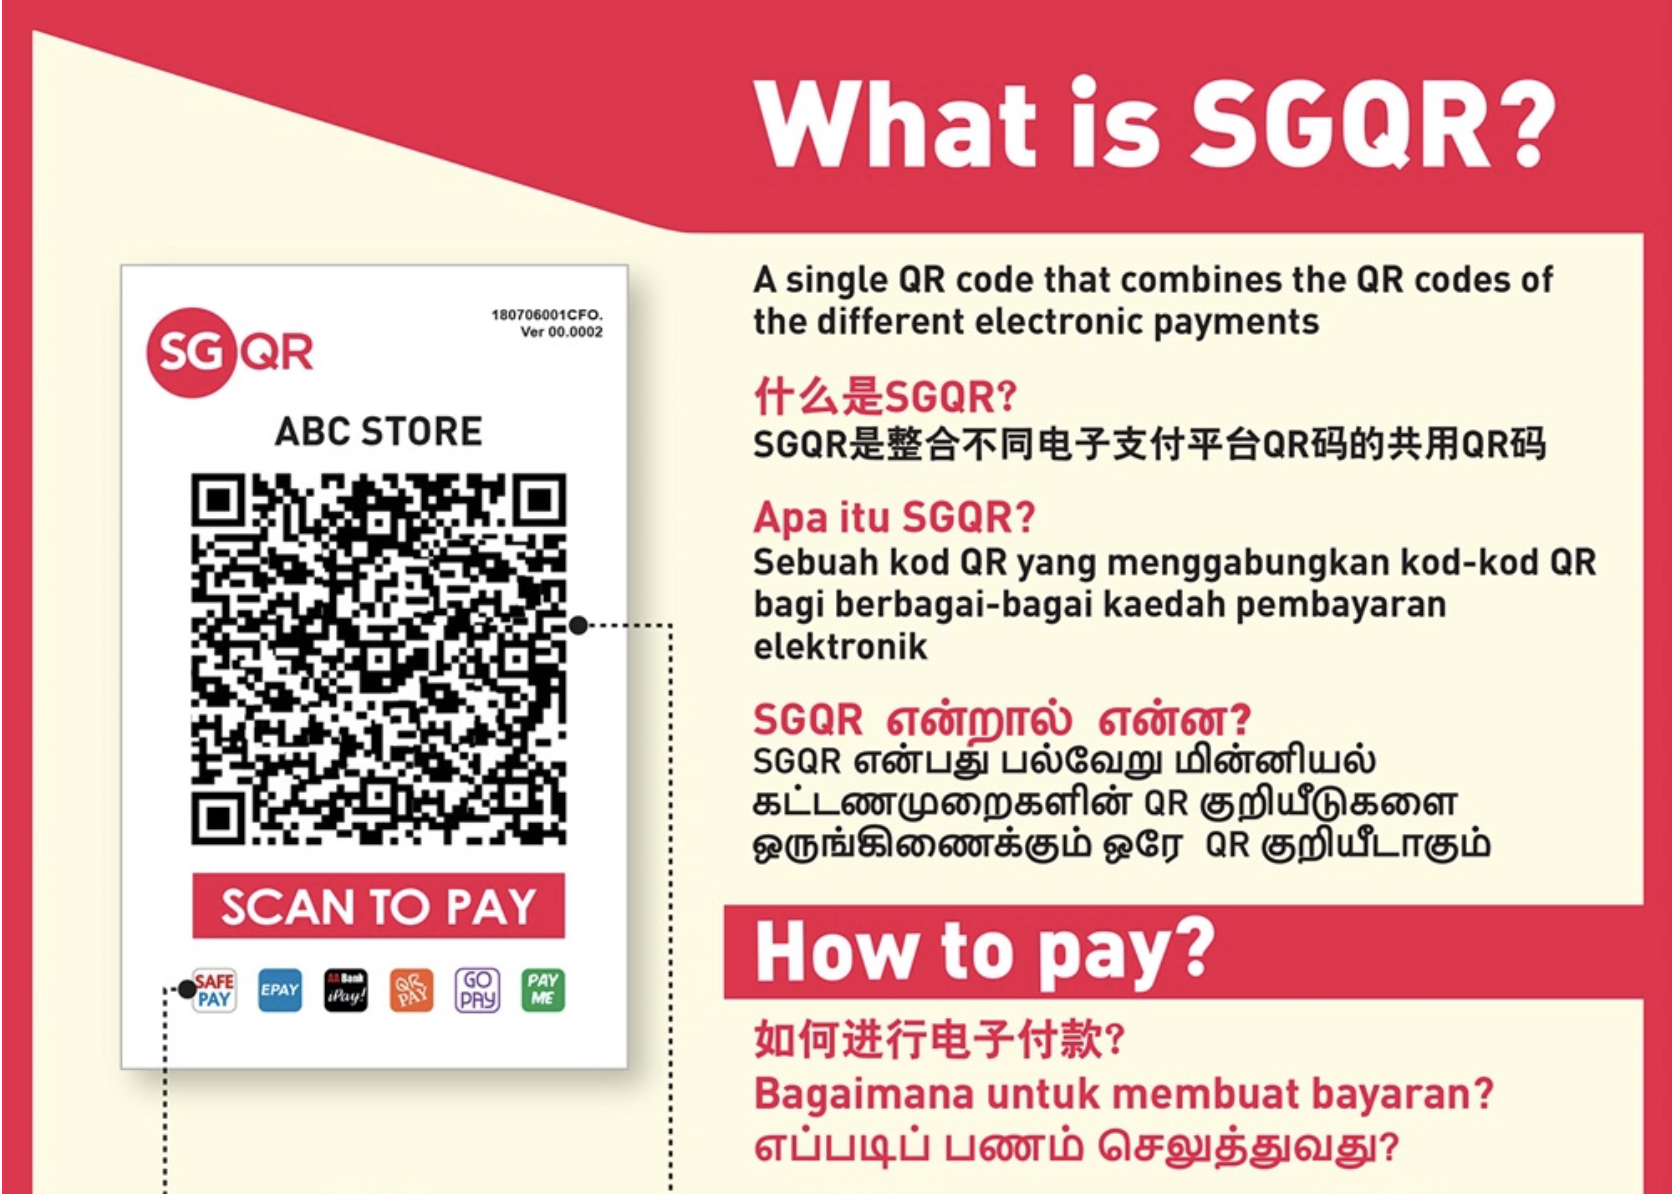 Image describing the SGQR QR code system with the headline "What is SGQR?"